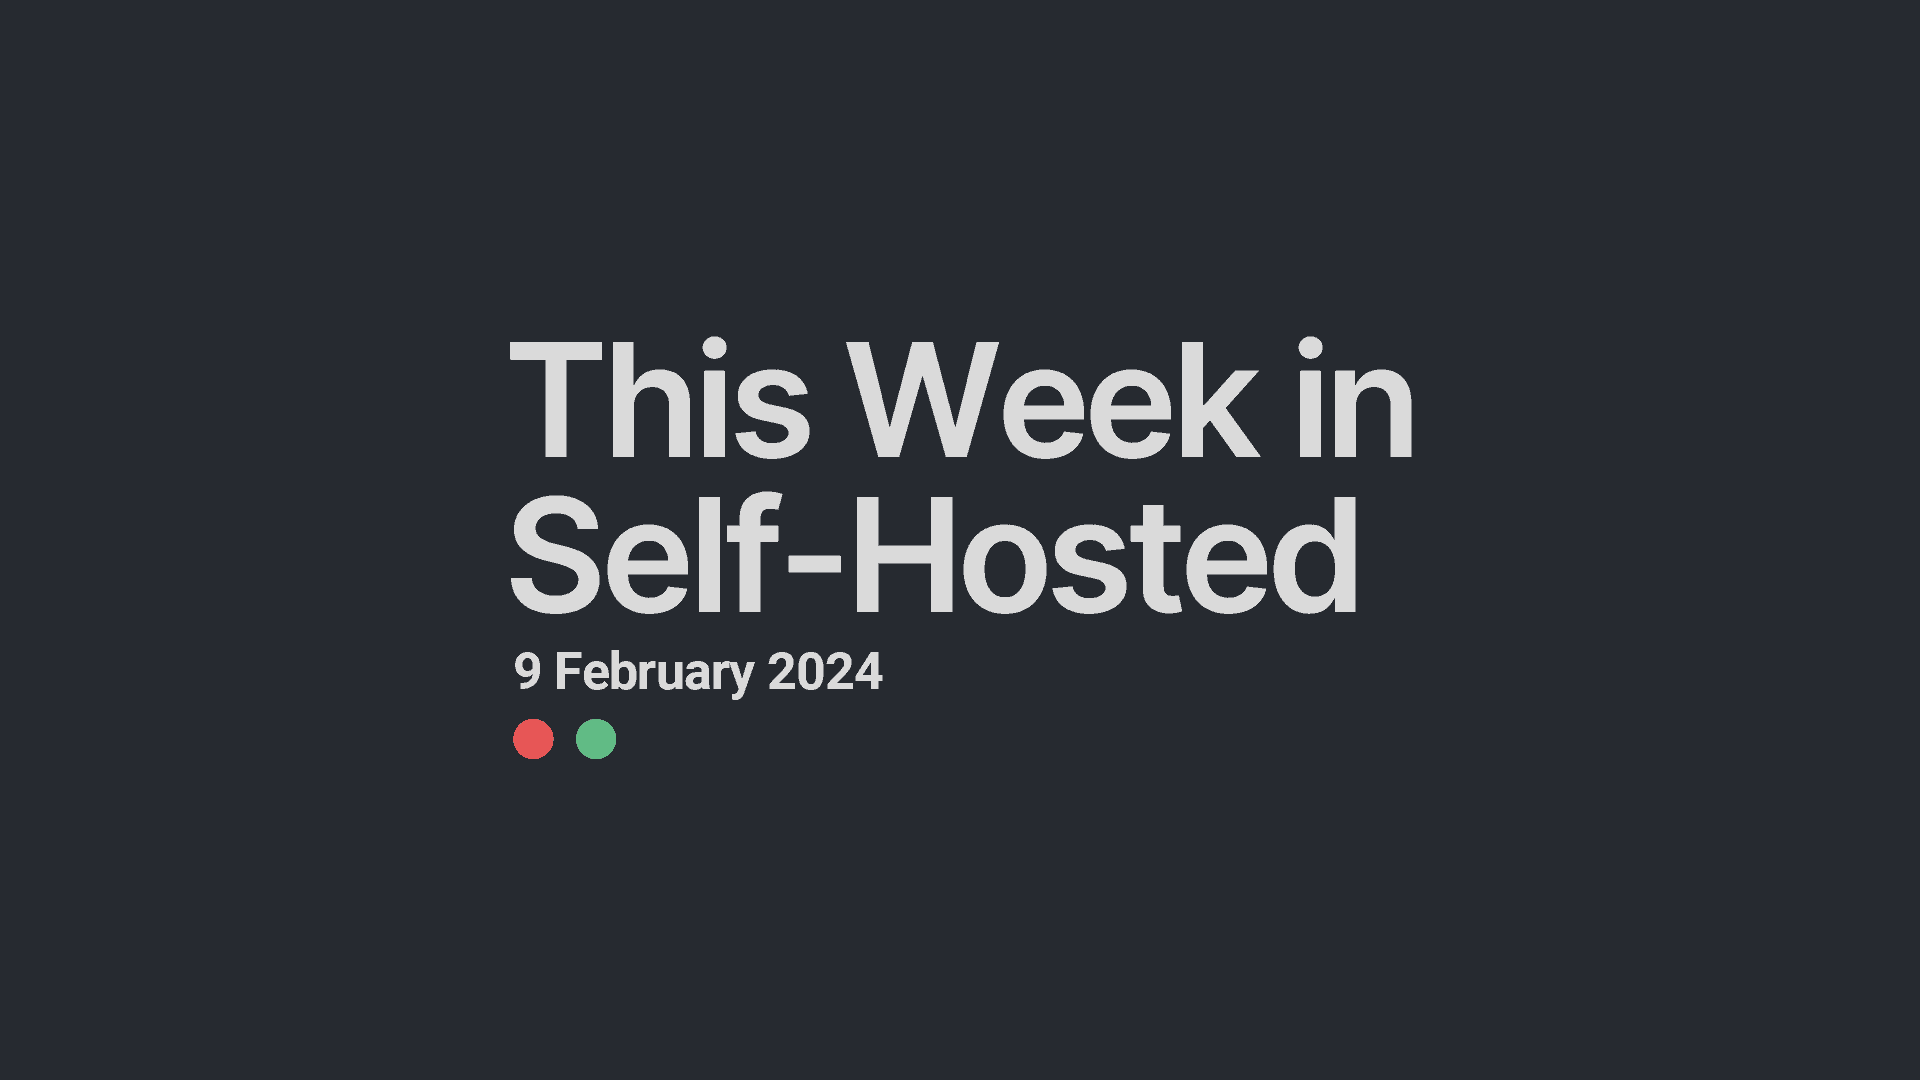 This Week in Self-Hosted (9 February 2024) Post image